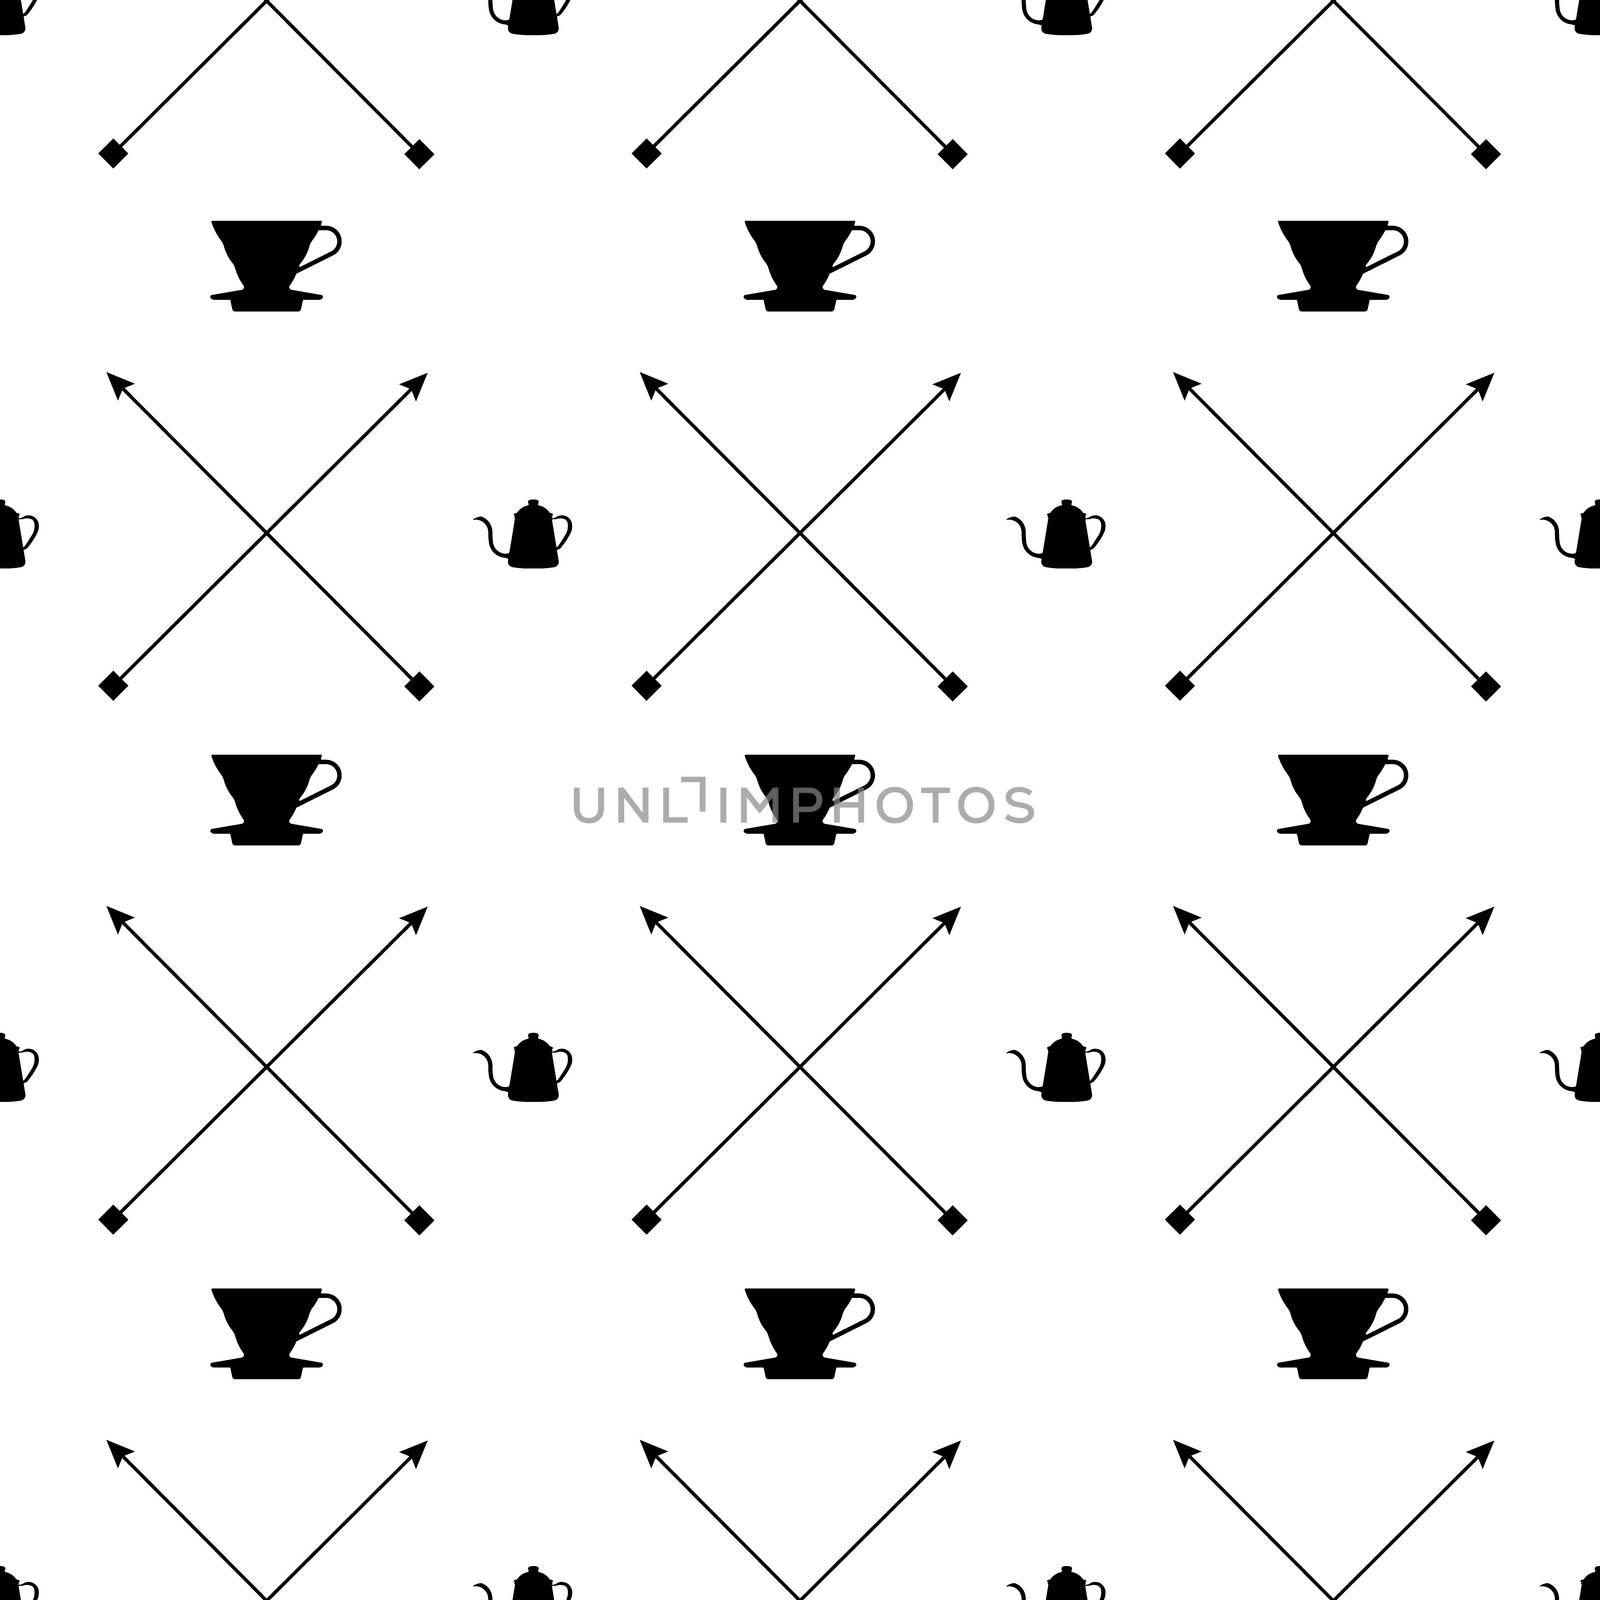 Black and white flat design icons, Pour over drip coffee makers, goose neck kettles, and crossed arrows are illustrated to be seamless graphic pattern.